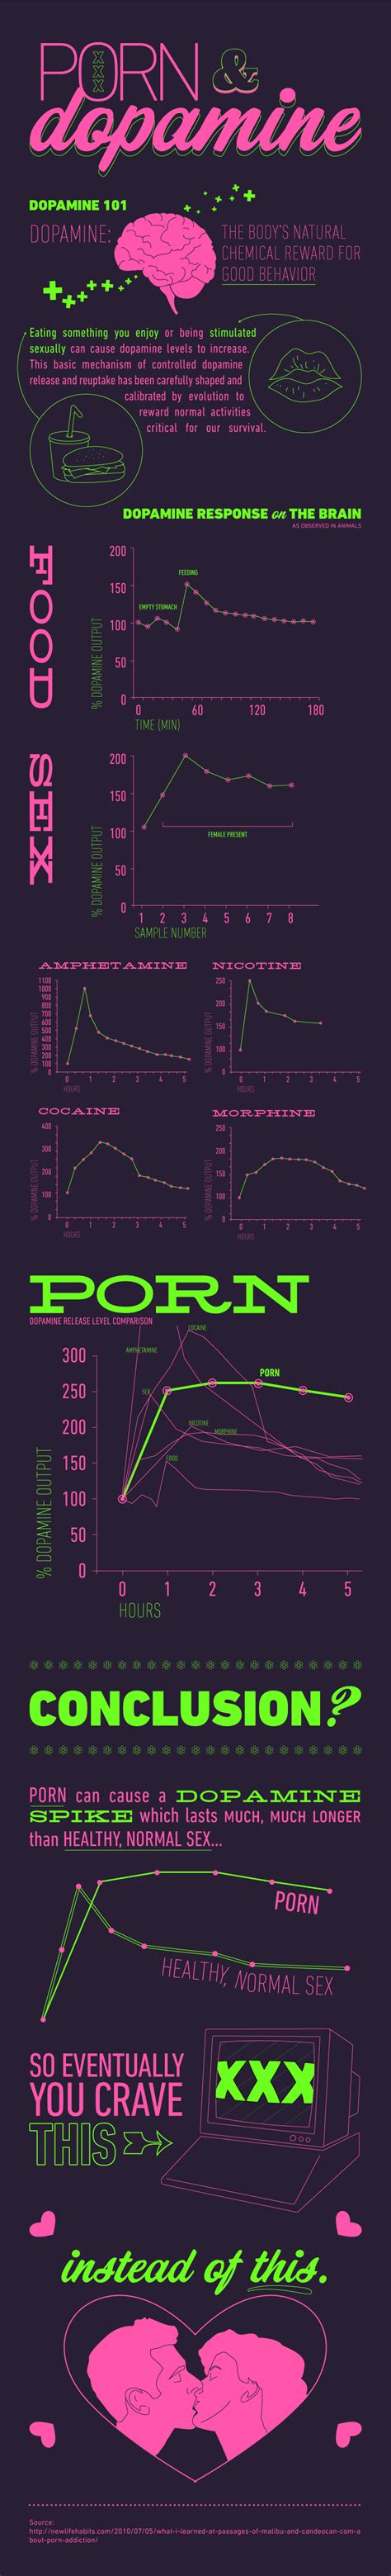 Porn Effects On Dopamine Levels Visually